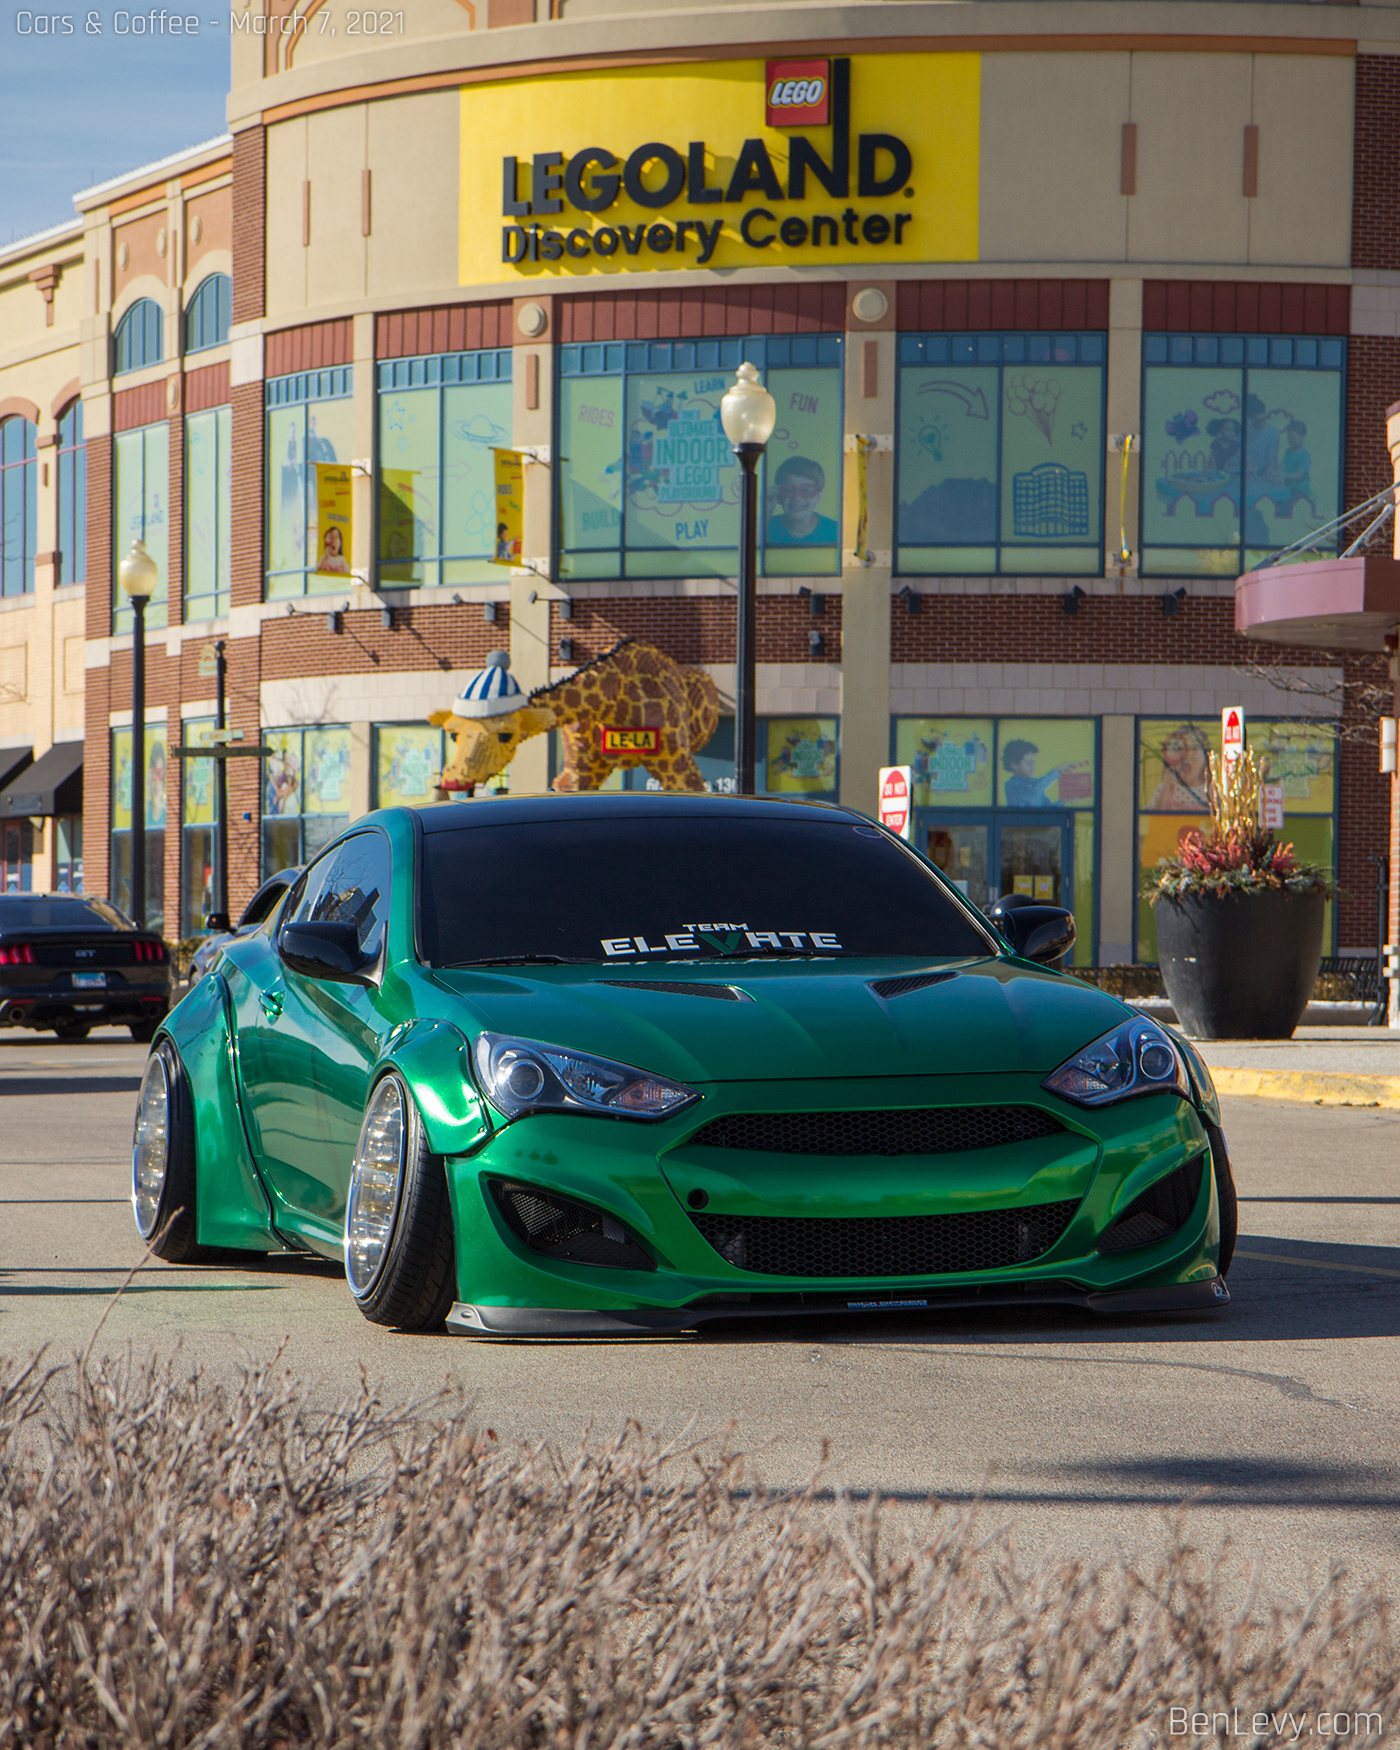 Widebody Hyundai Genesis Coupe in front of Legoland